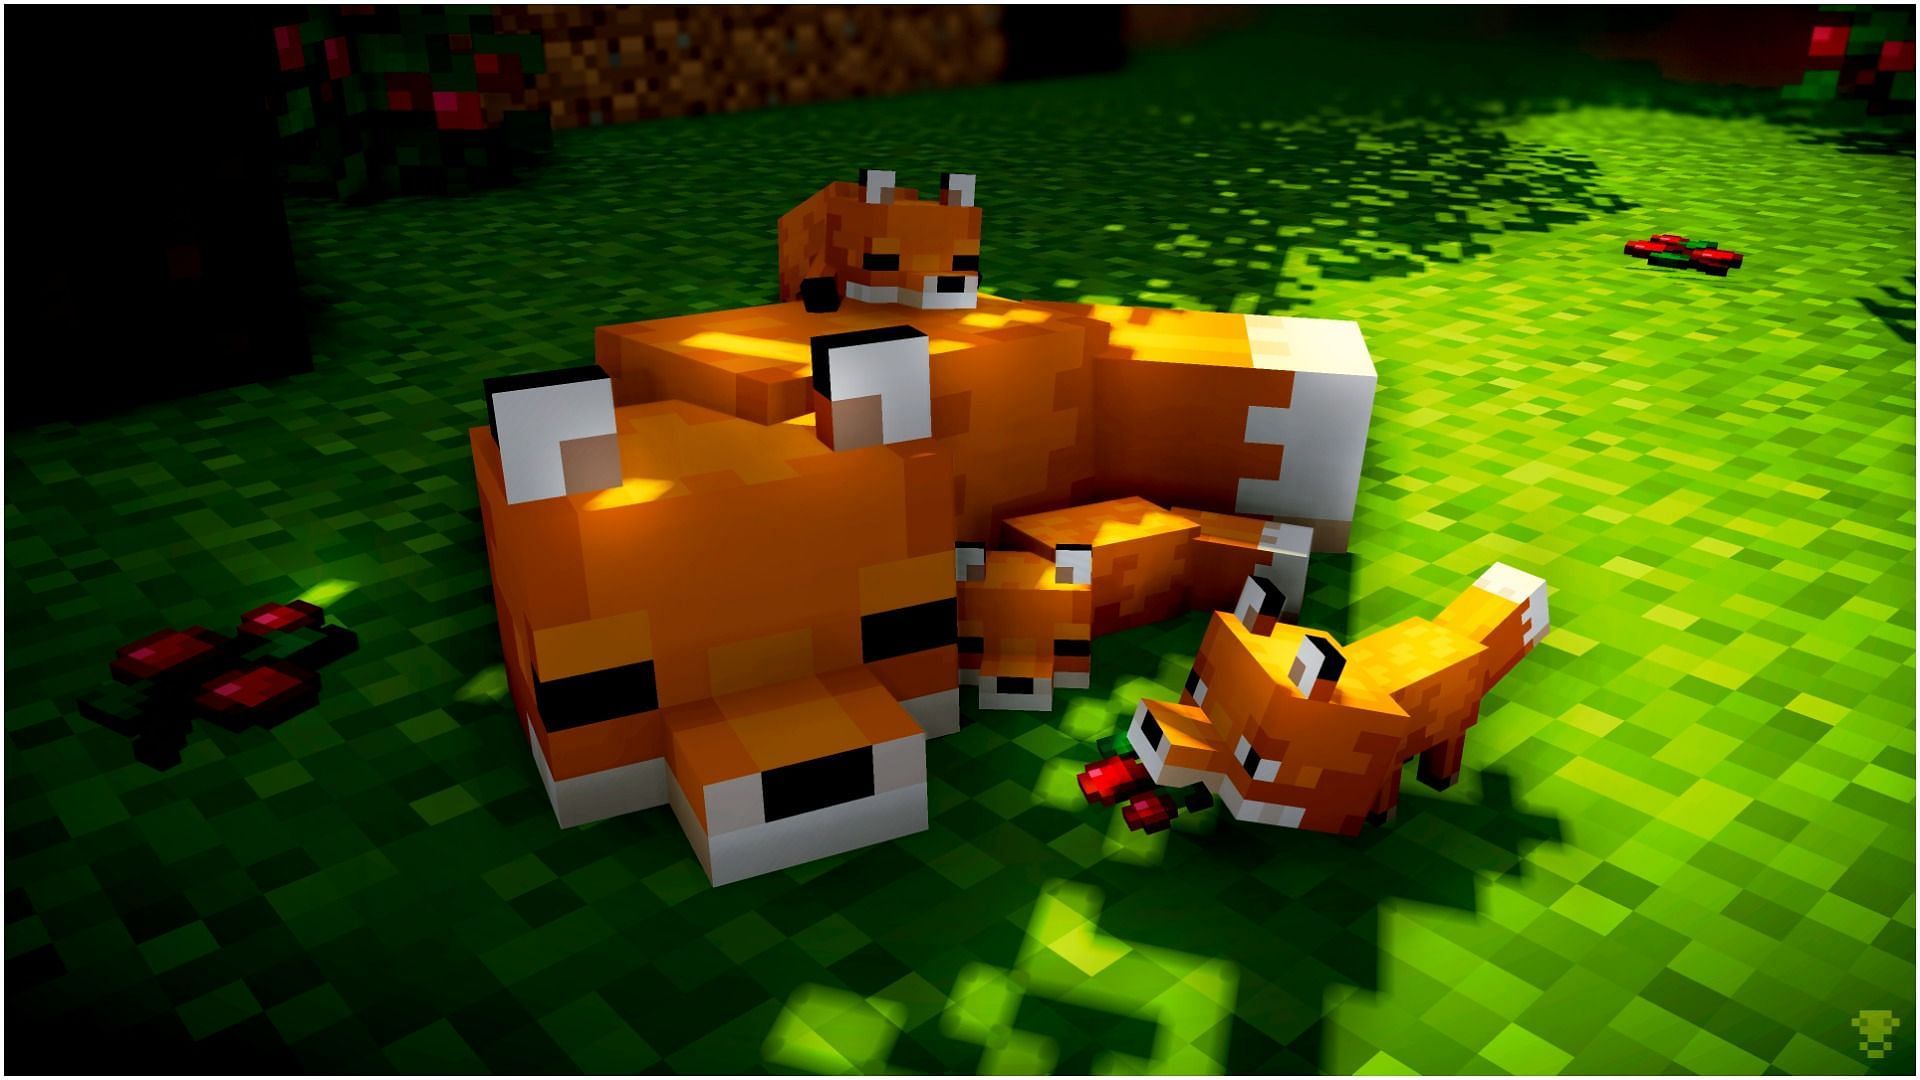 Foxes in Minecraft (Image via WallapaperAccess)